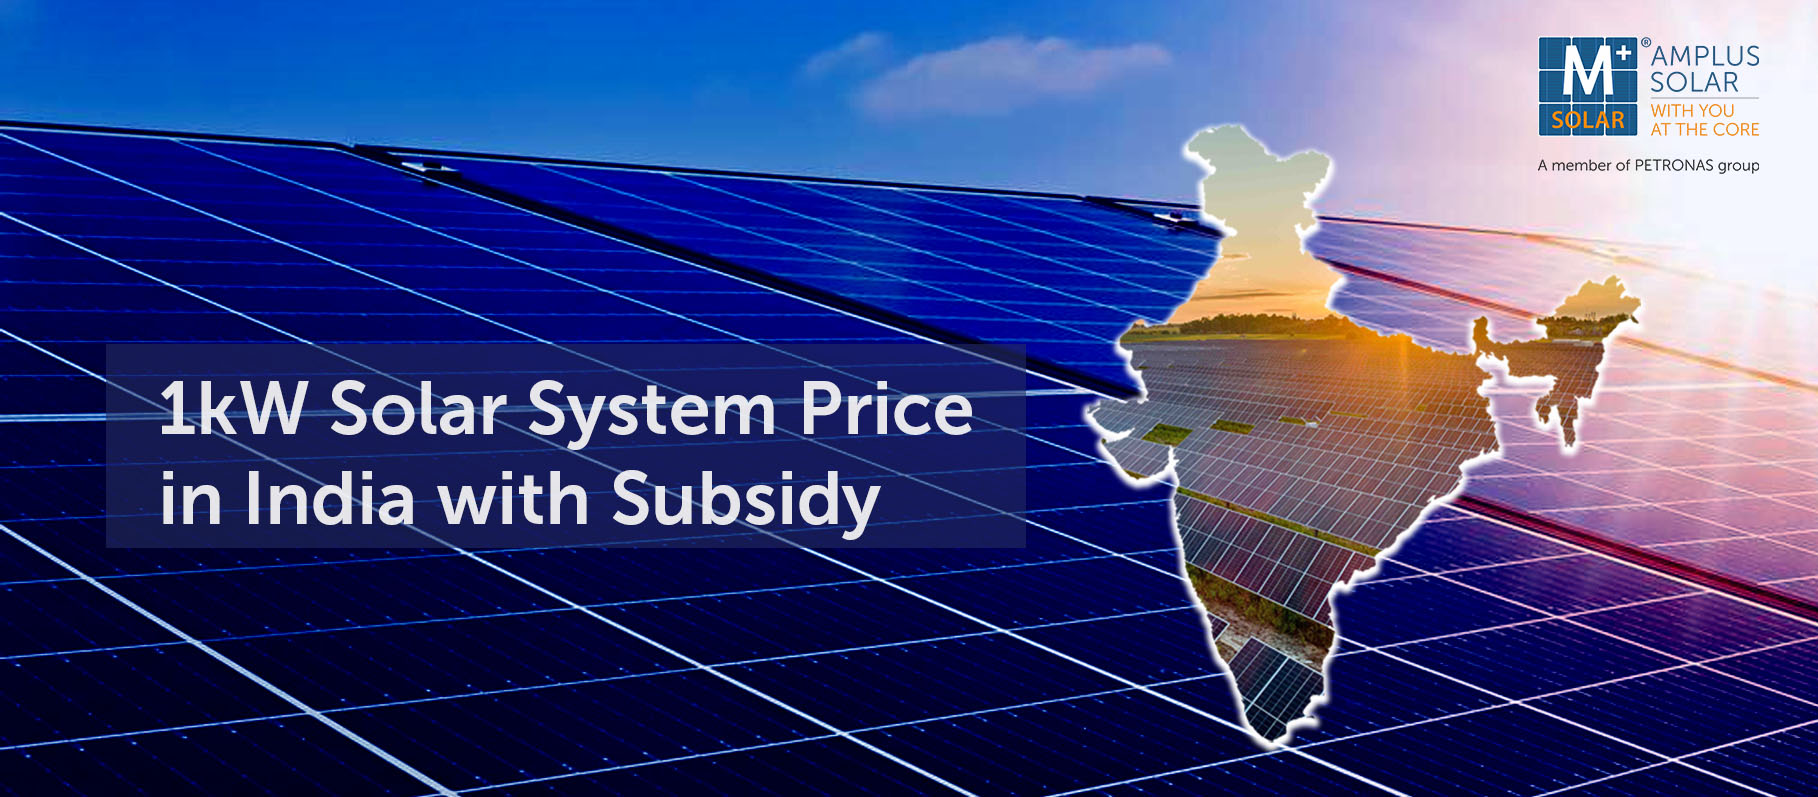 1kW Solar System Price in India with Subsidy